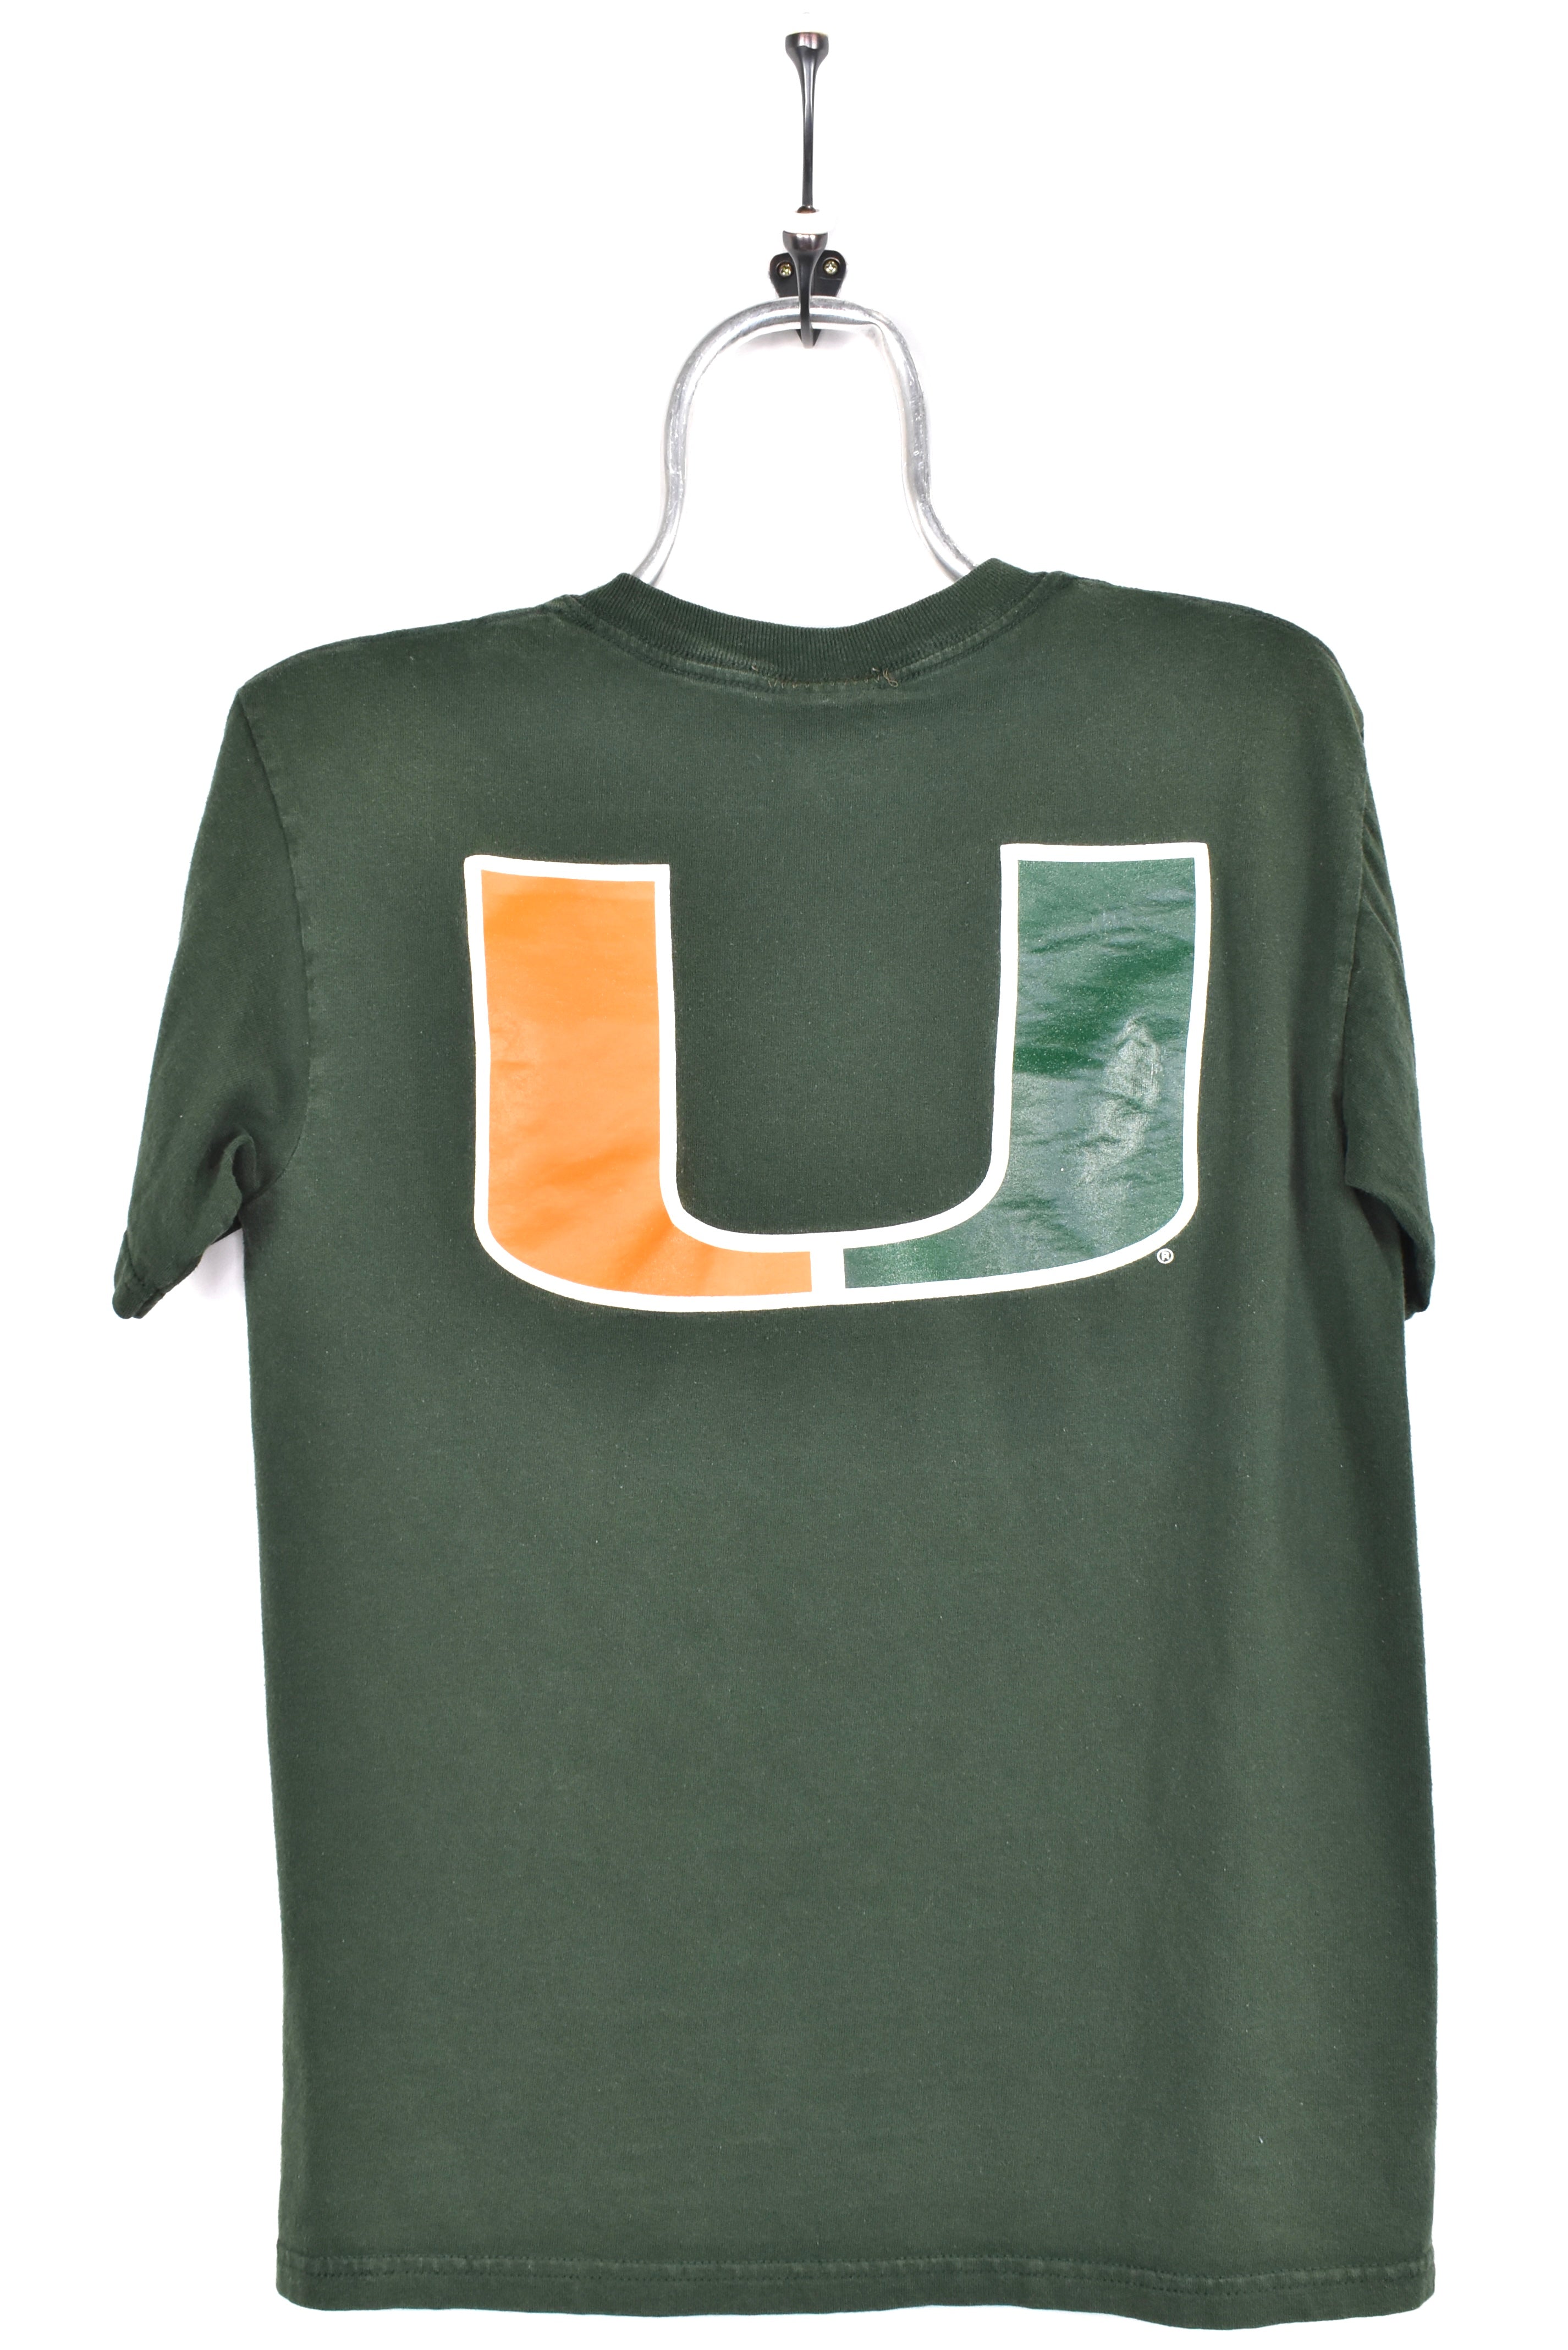 Vintage University of Miami shirt, Hurricanes green graphic graphic tee - AU Small COLLEGE